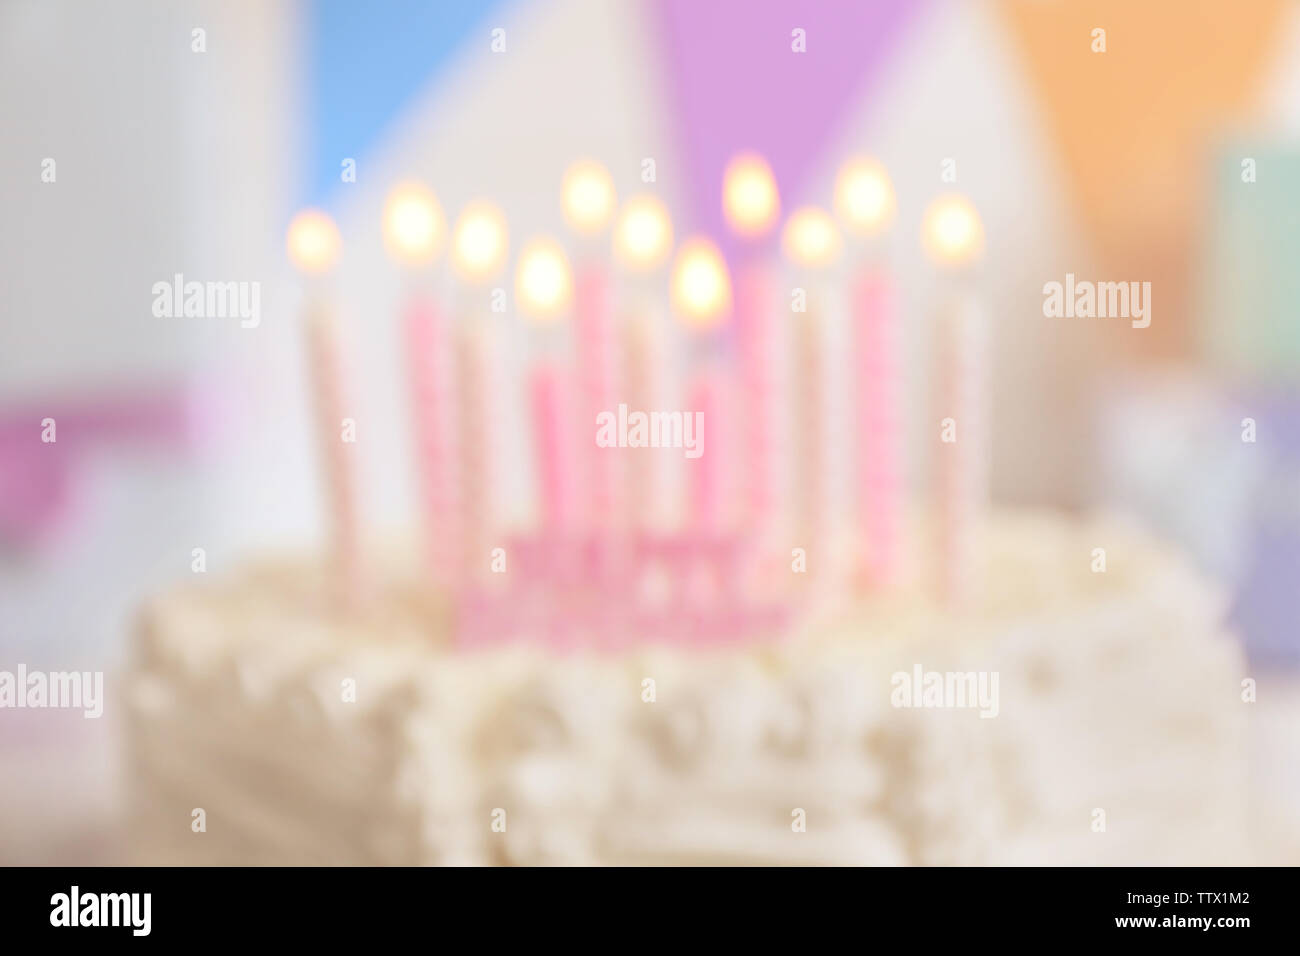 Blurred Birthday cake with candles on light background Stock Photo - Alamy